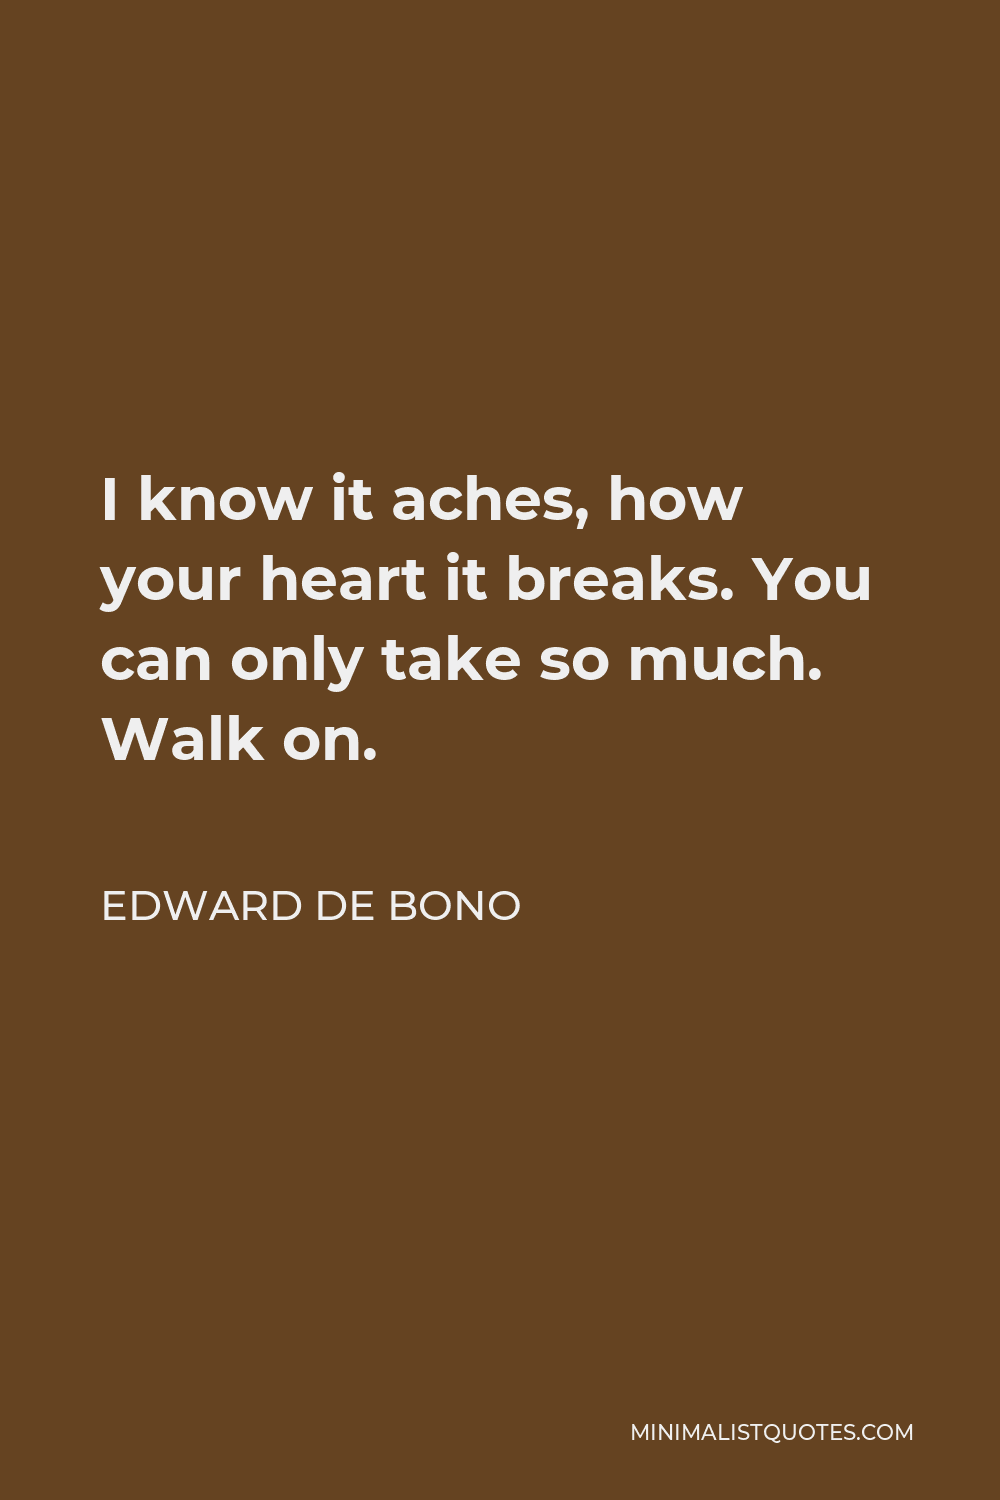 Edward de Bono Quote - I know it aches, how your heart it breaks. You can only take so much. Walk on.